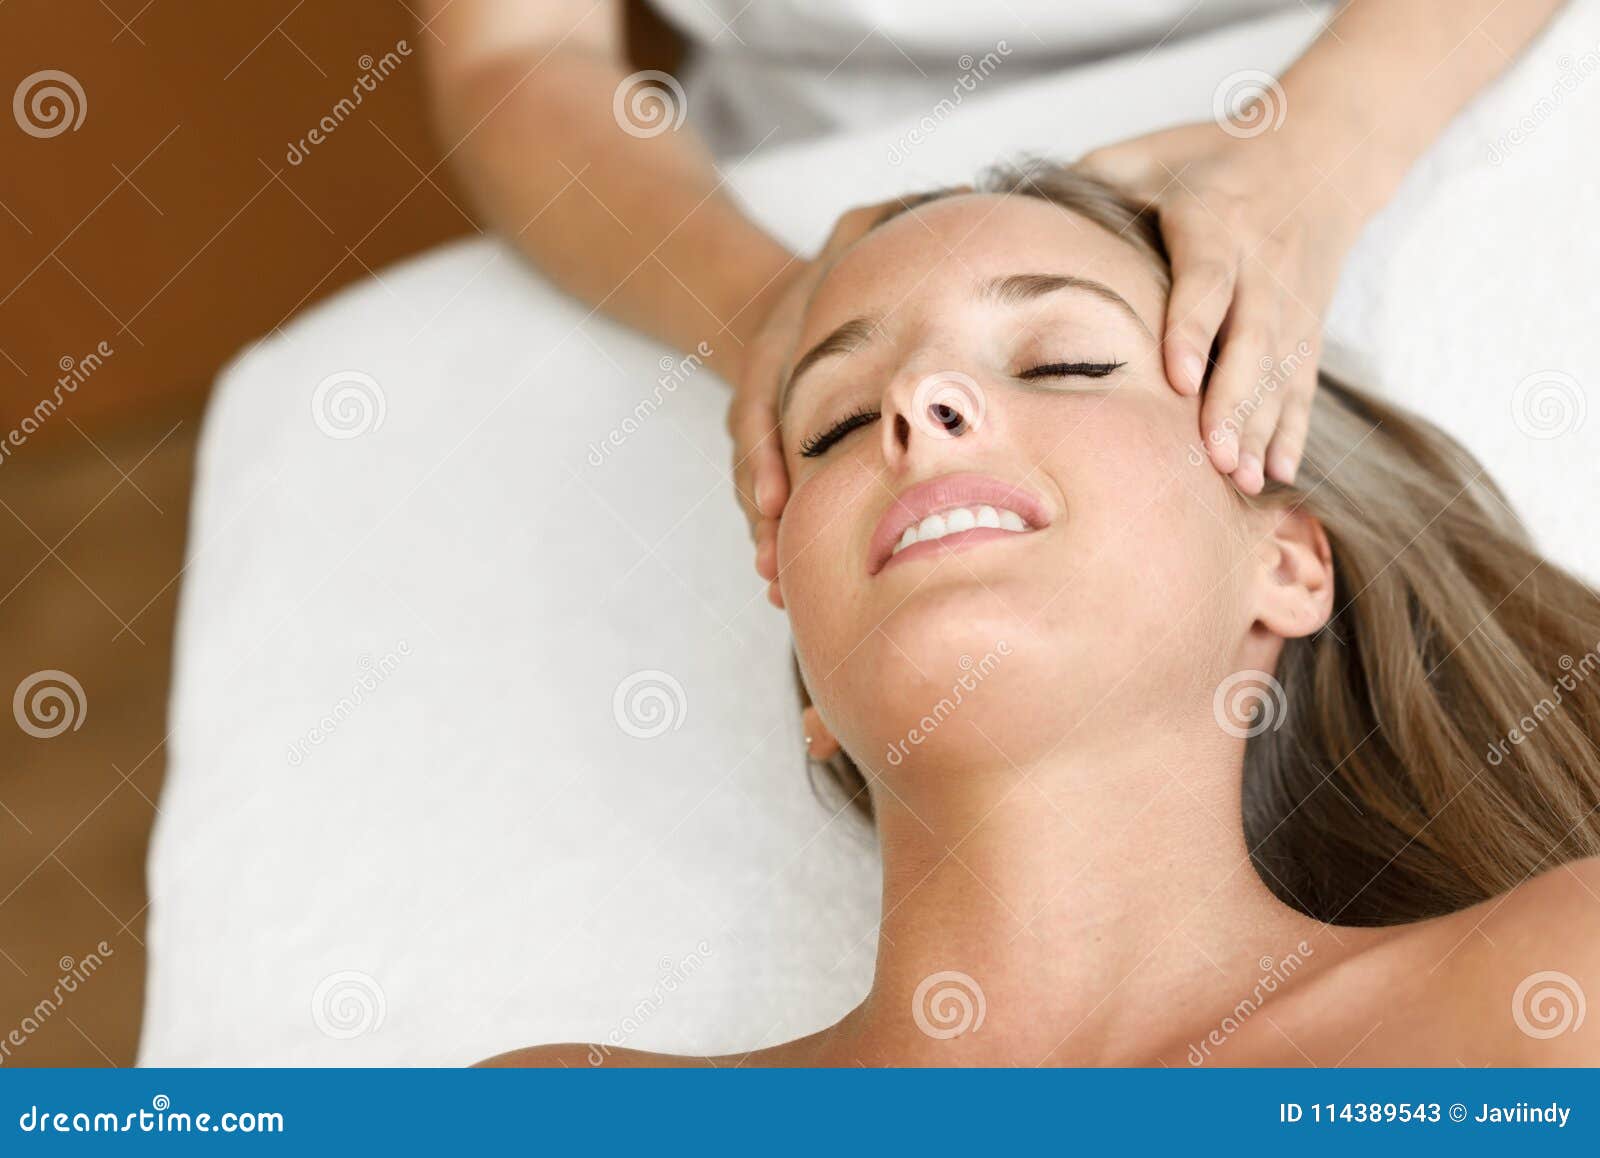 Young Woman Receiving A Head Massage In A Spa Center Stock Image Image Of Caucasian Massage